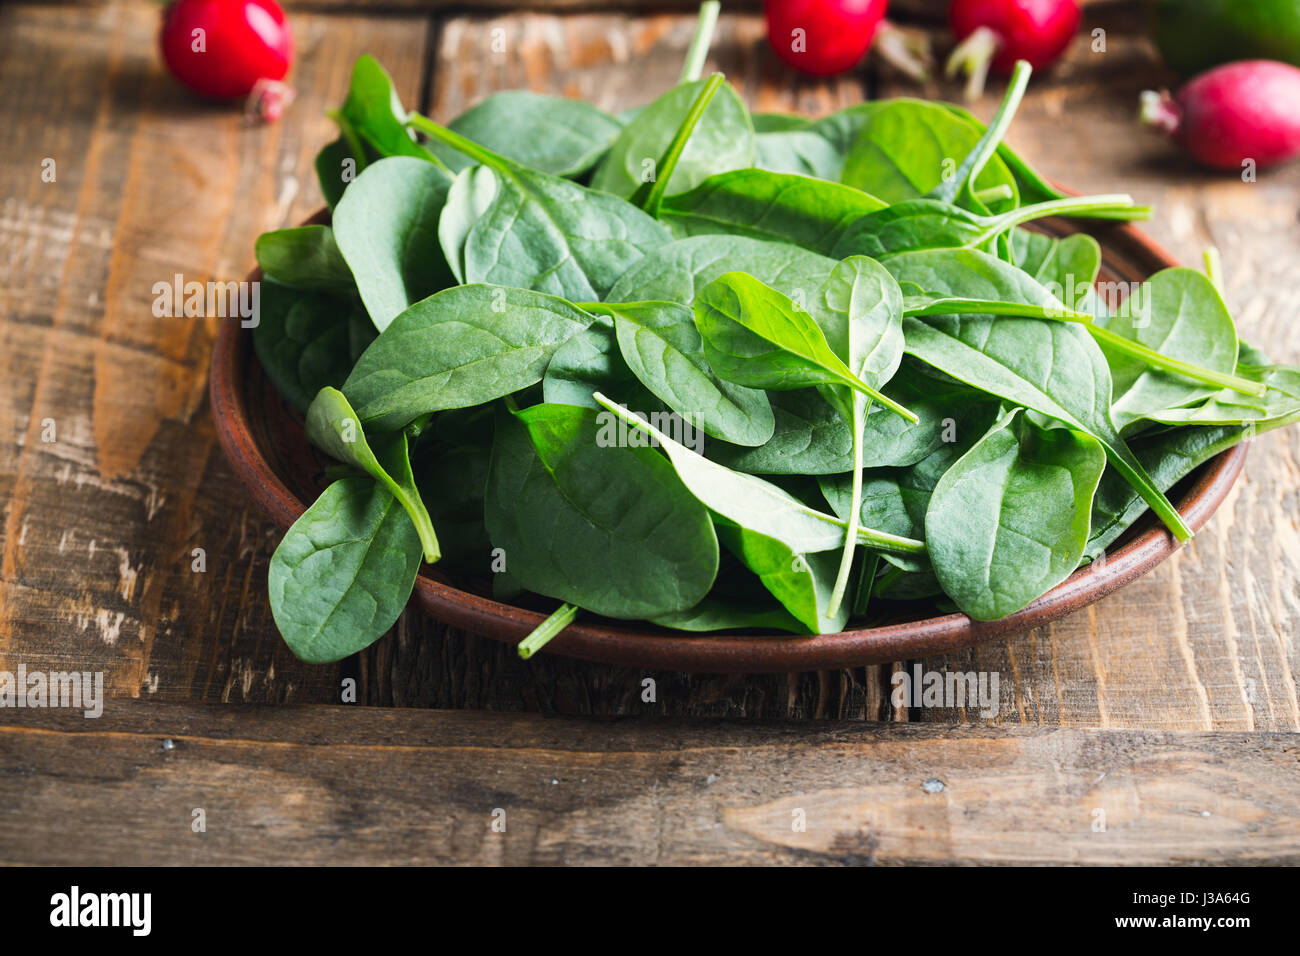 Fresh baby spinach leaves in rustic ceramic bowl Stock Photo